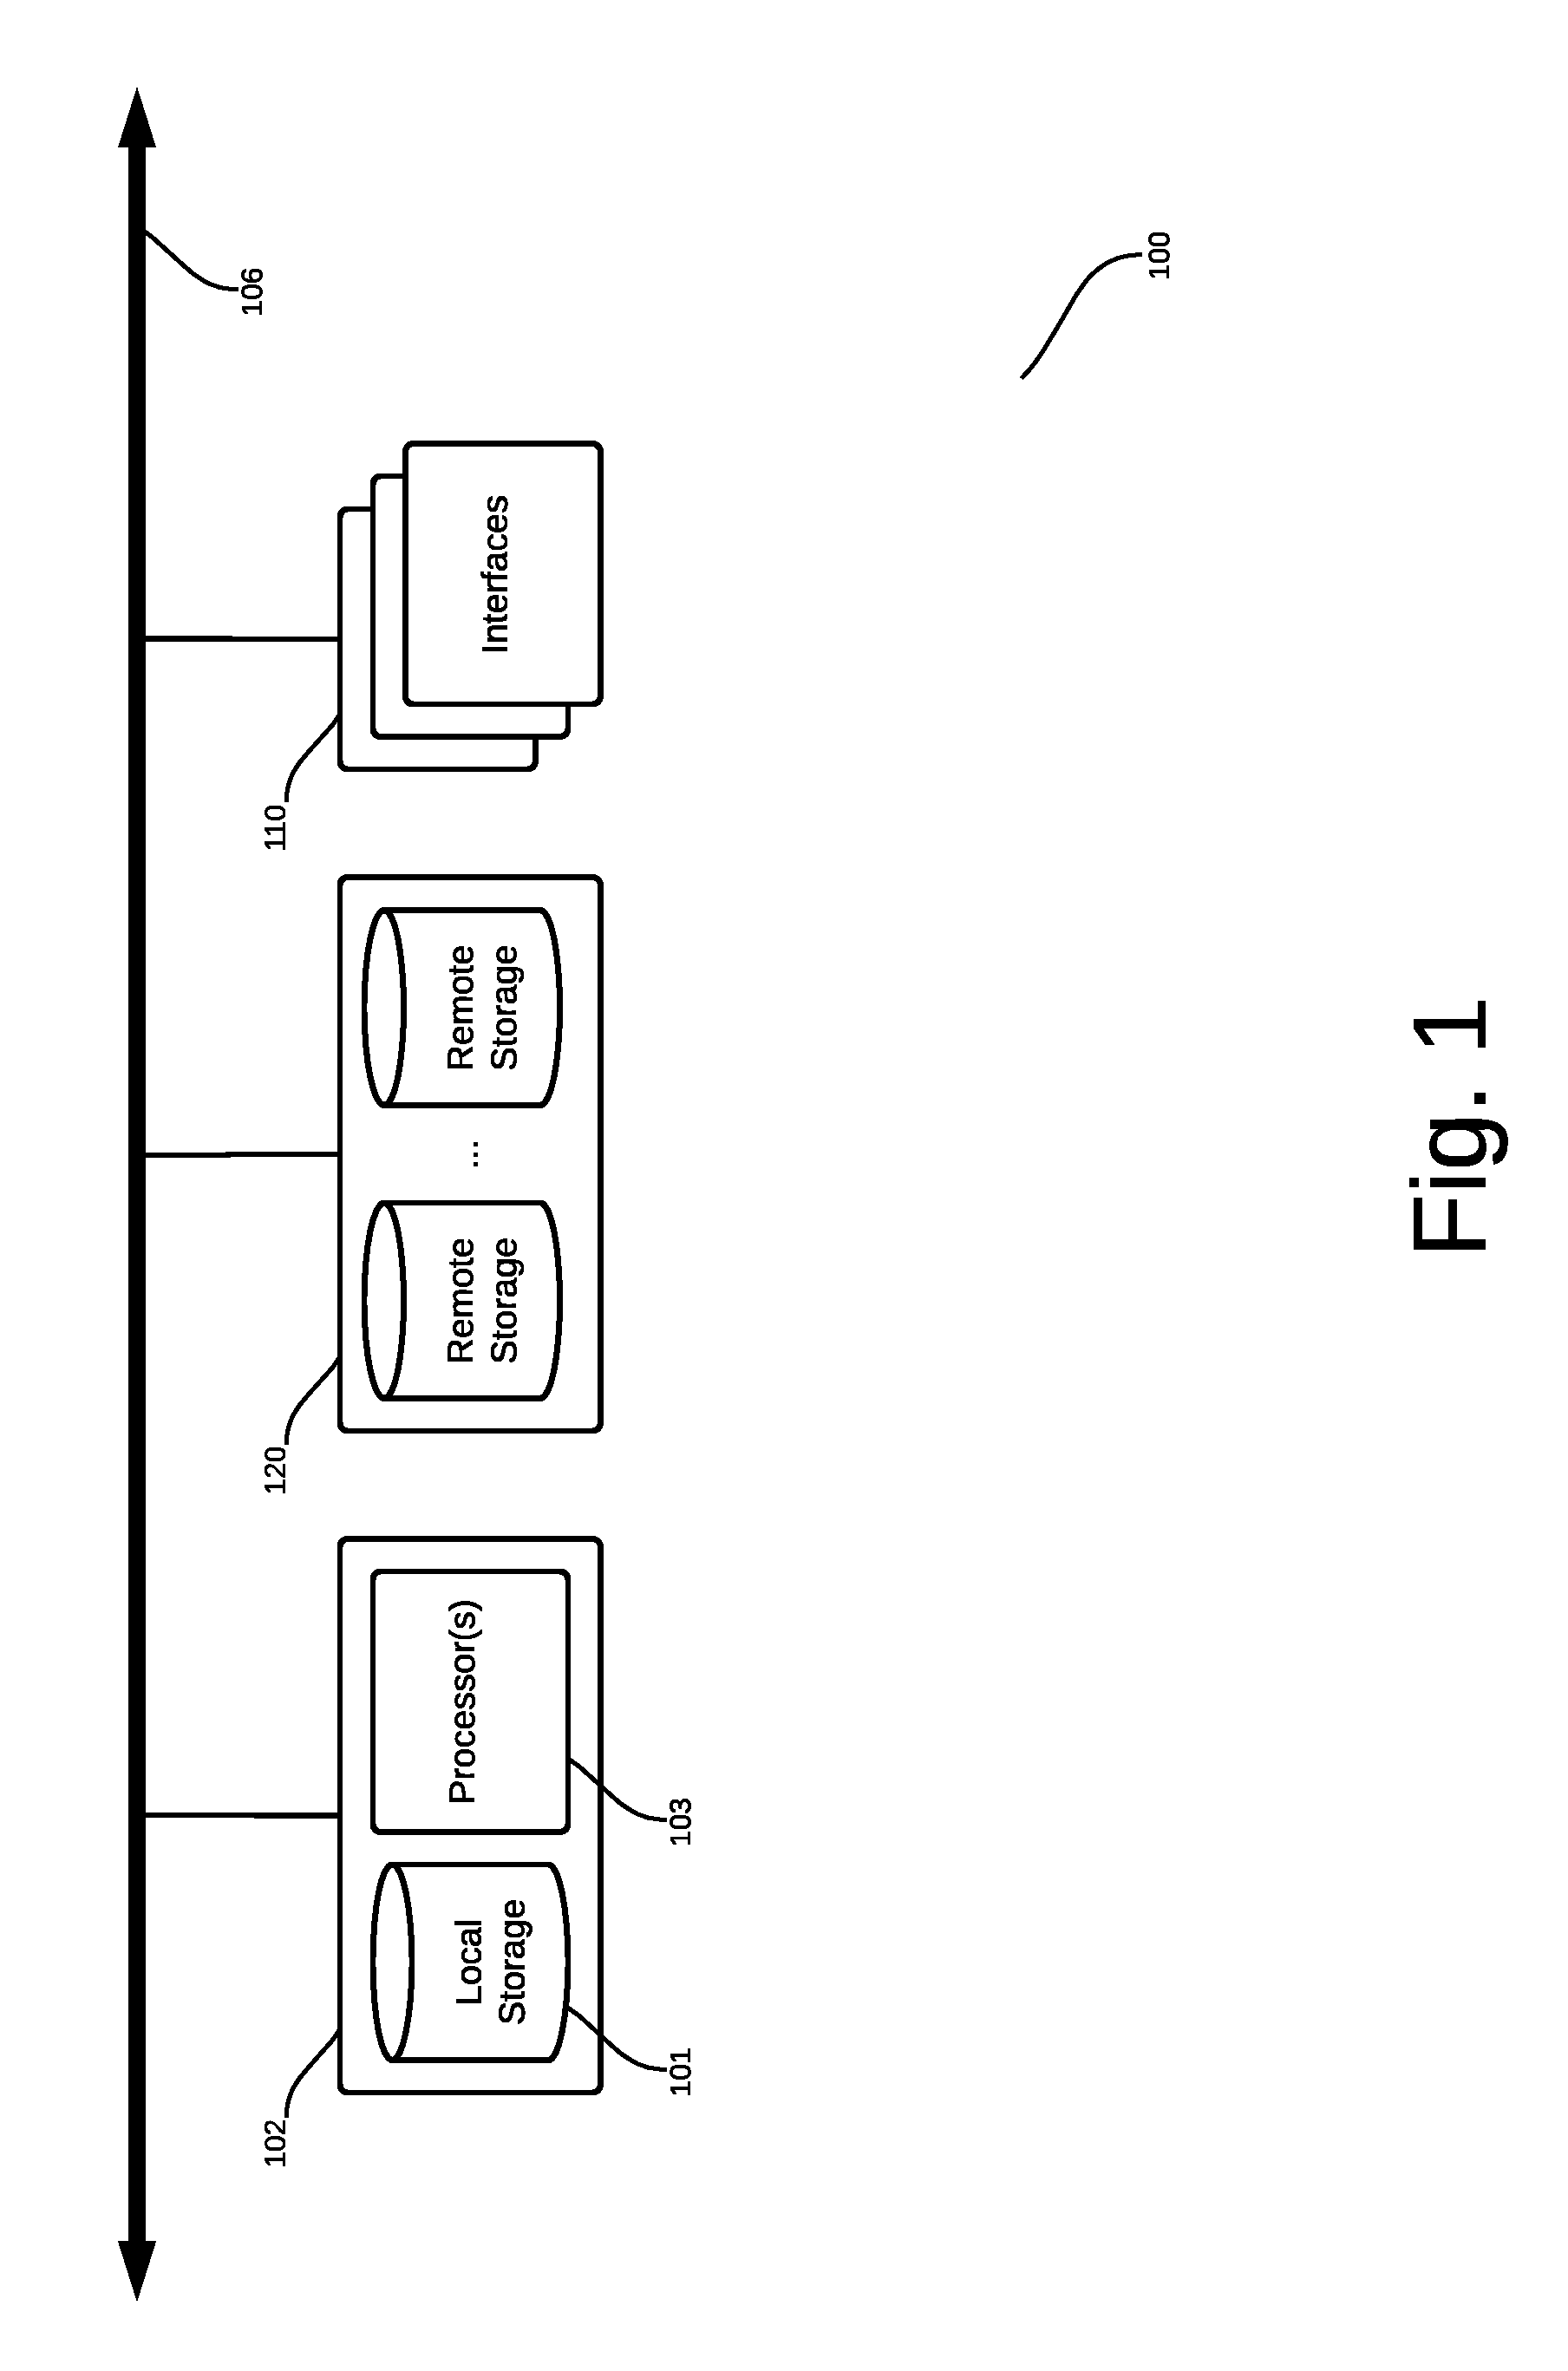 System and method for efficient processing of tax preparation services by centralized and distributed tax resources